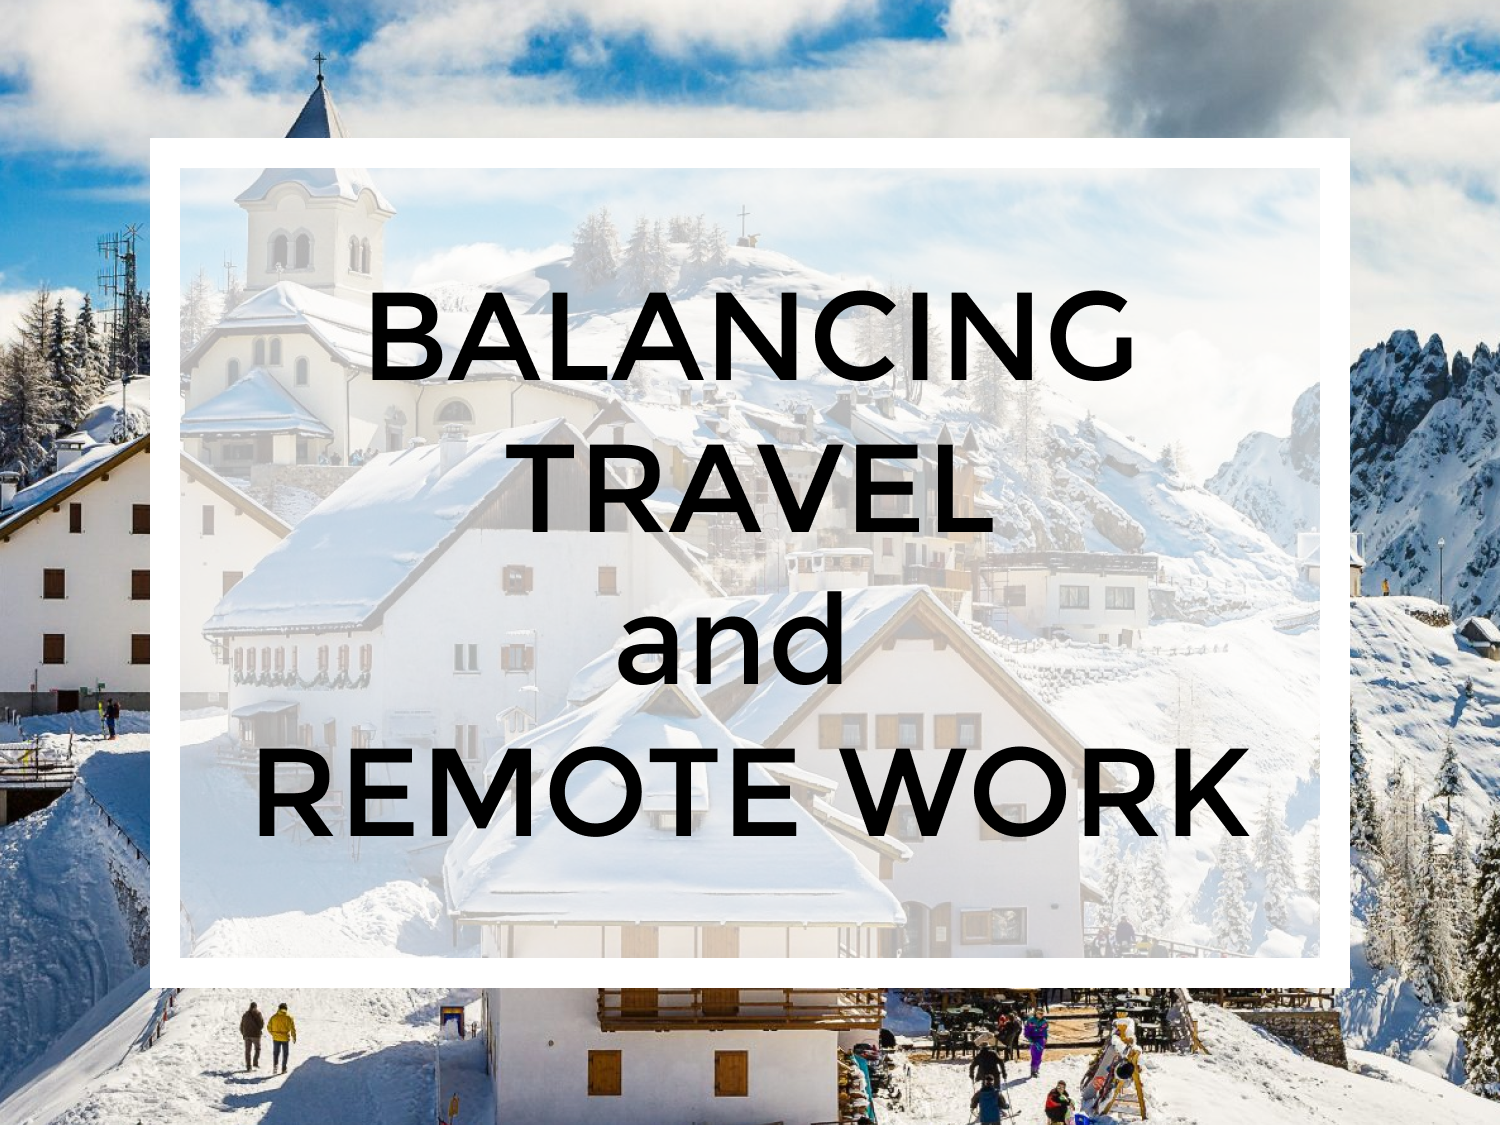 How to Balance Travel and Remote Work